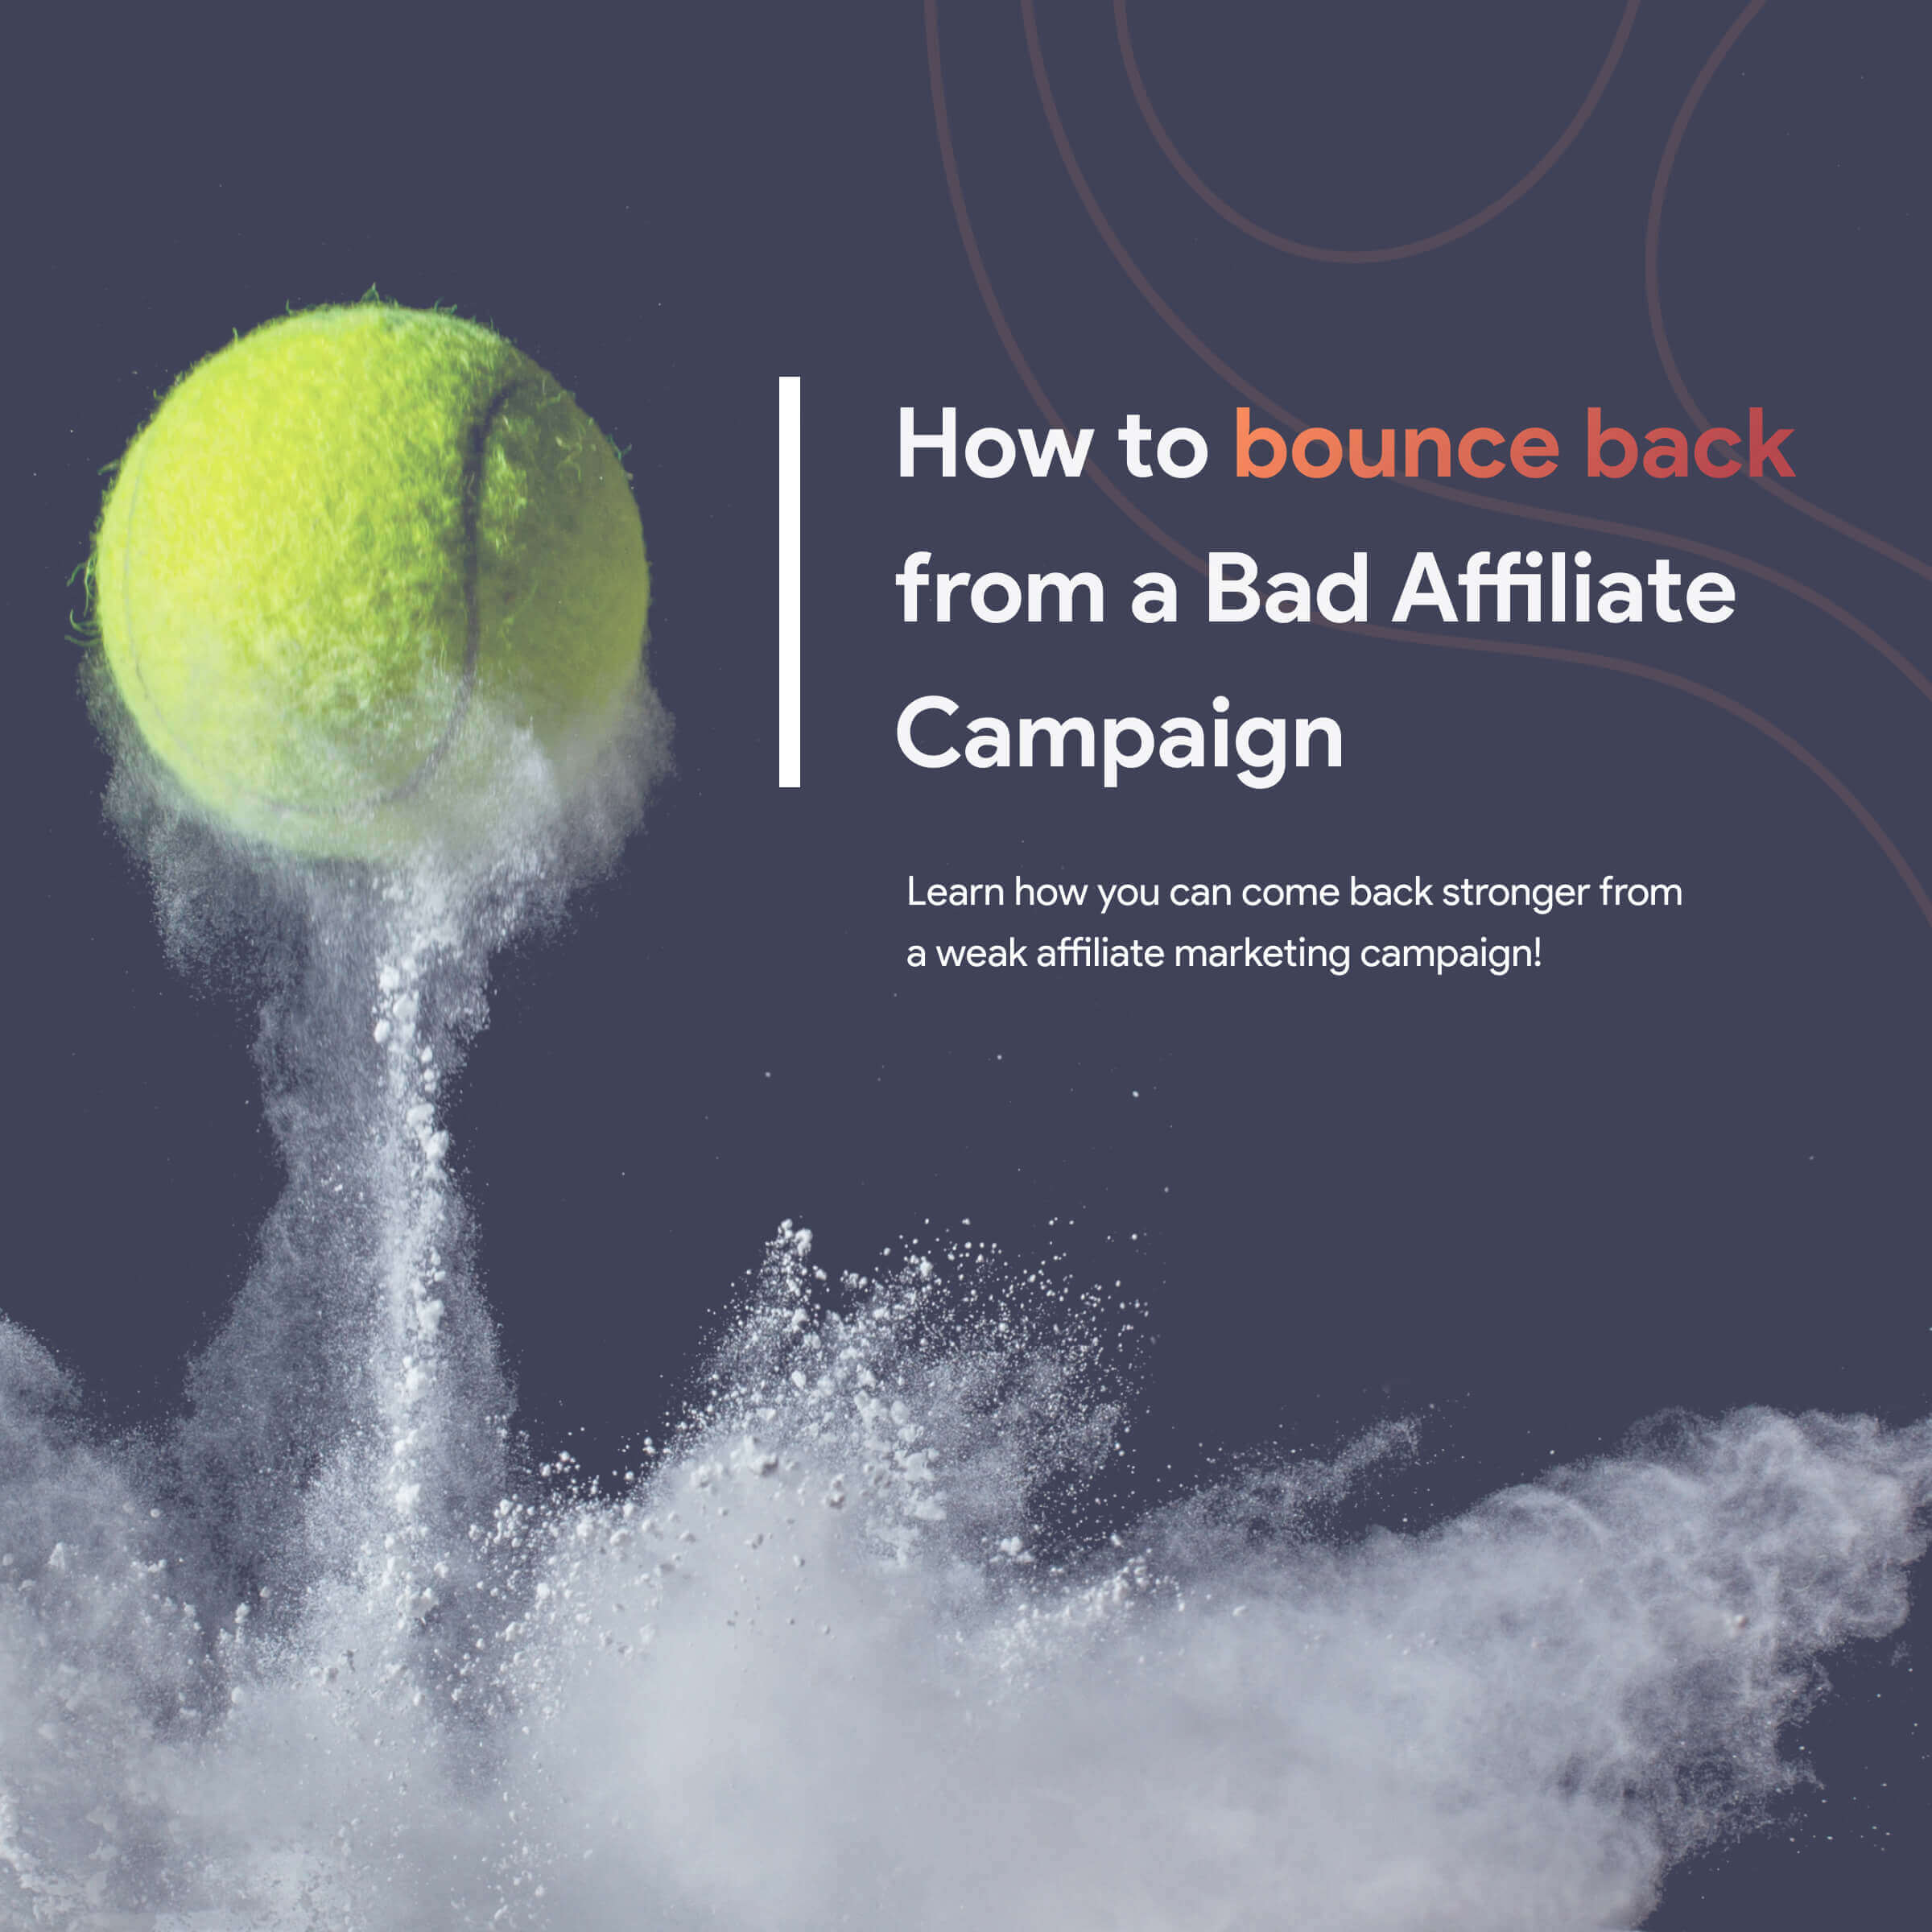 eBook - How to bounce back from a Bad Affiliate Campaign